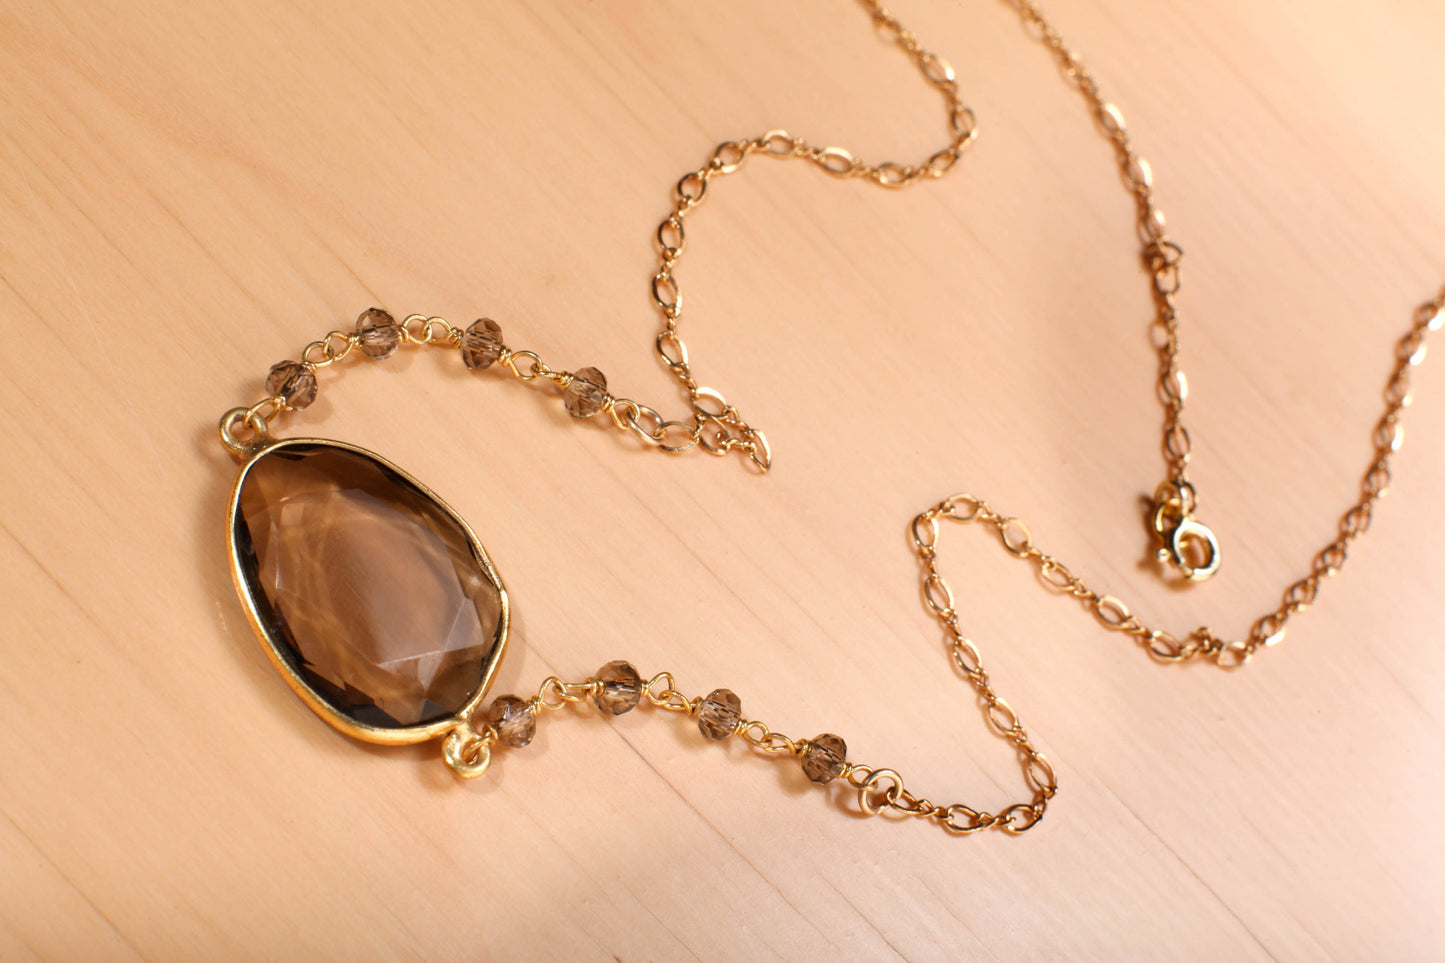 Genuine Smokey Quartz Gold Bezel with Smokey Quartz Wire Wrapped Gemstone Beaded Chain Finished in 14K Gold Filled Long and Short Oval Chain